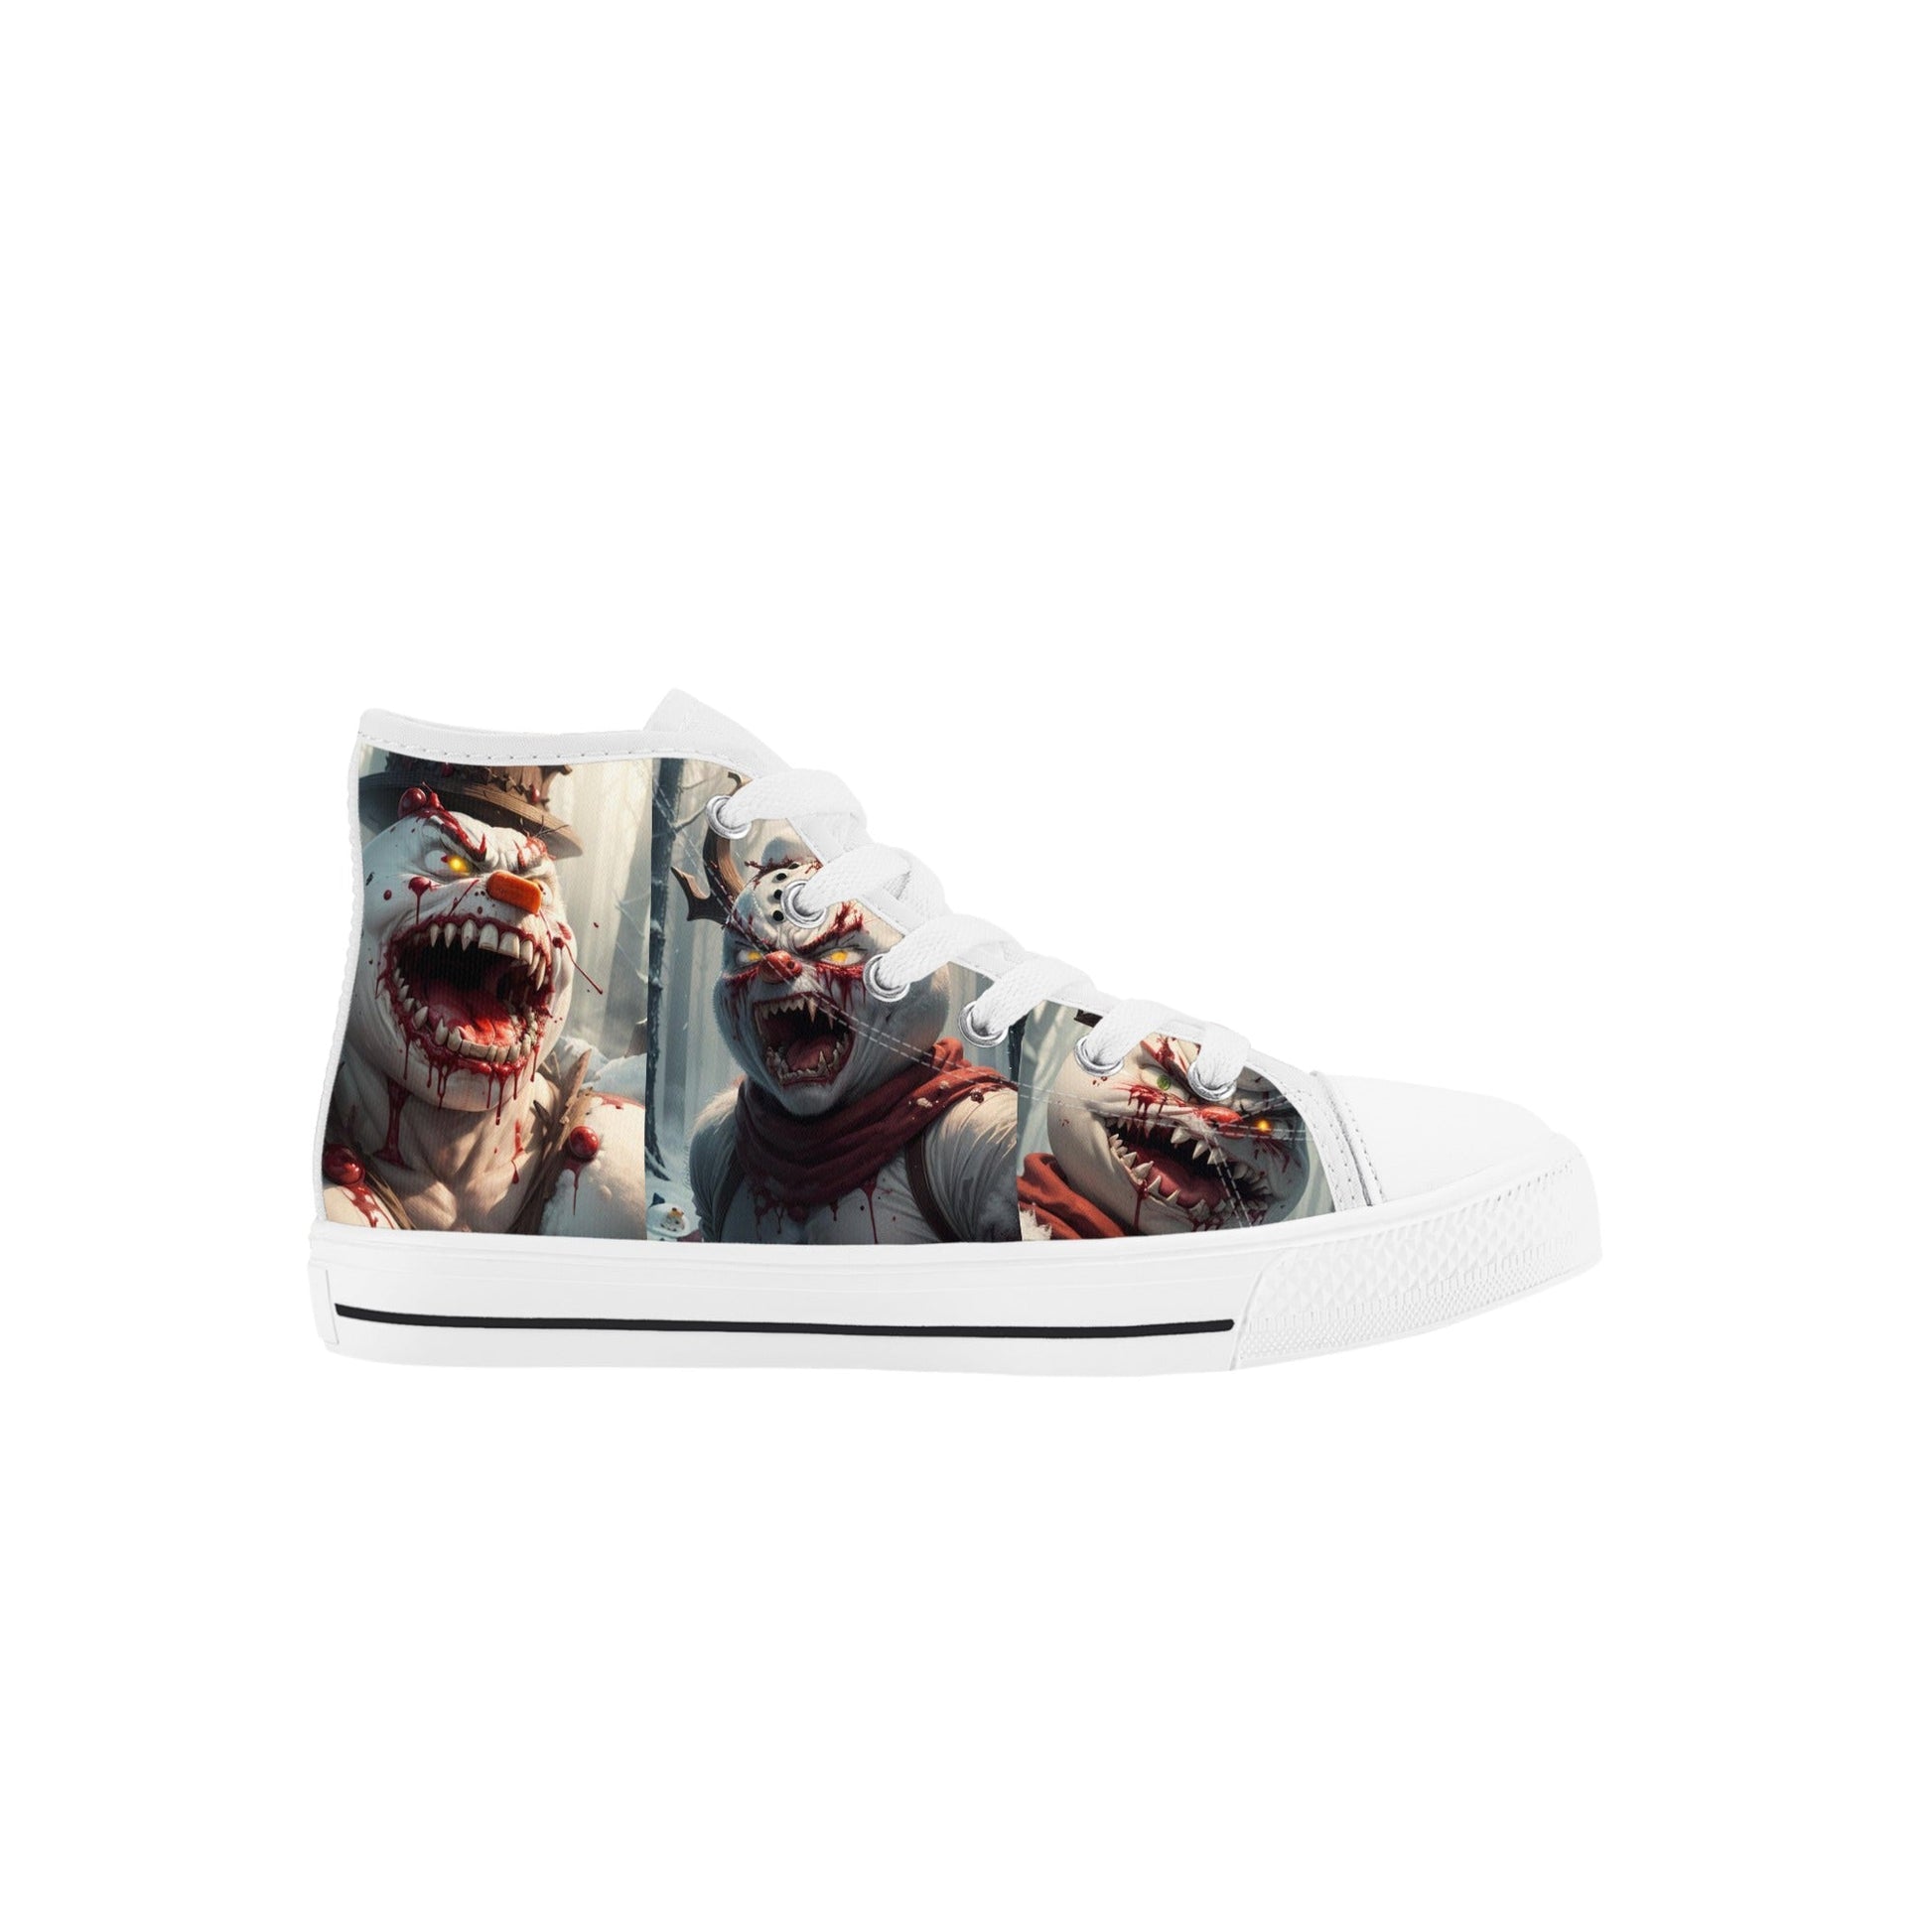 Stand out  with the  Frostys revenge Kids High Top Canvas Shoes  available at Hey Nugget. Grab yours today!